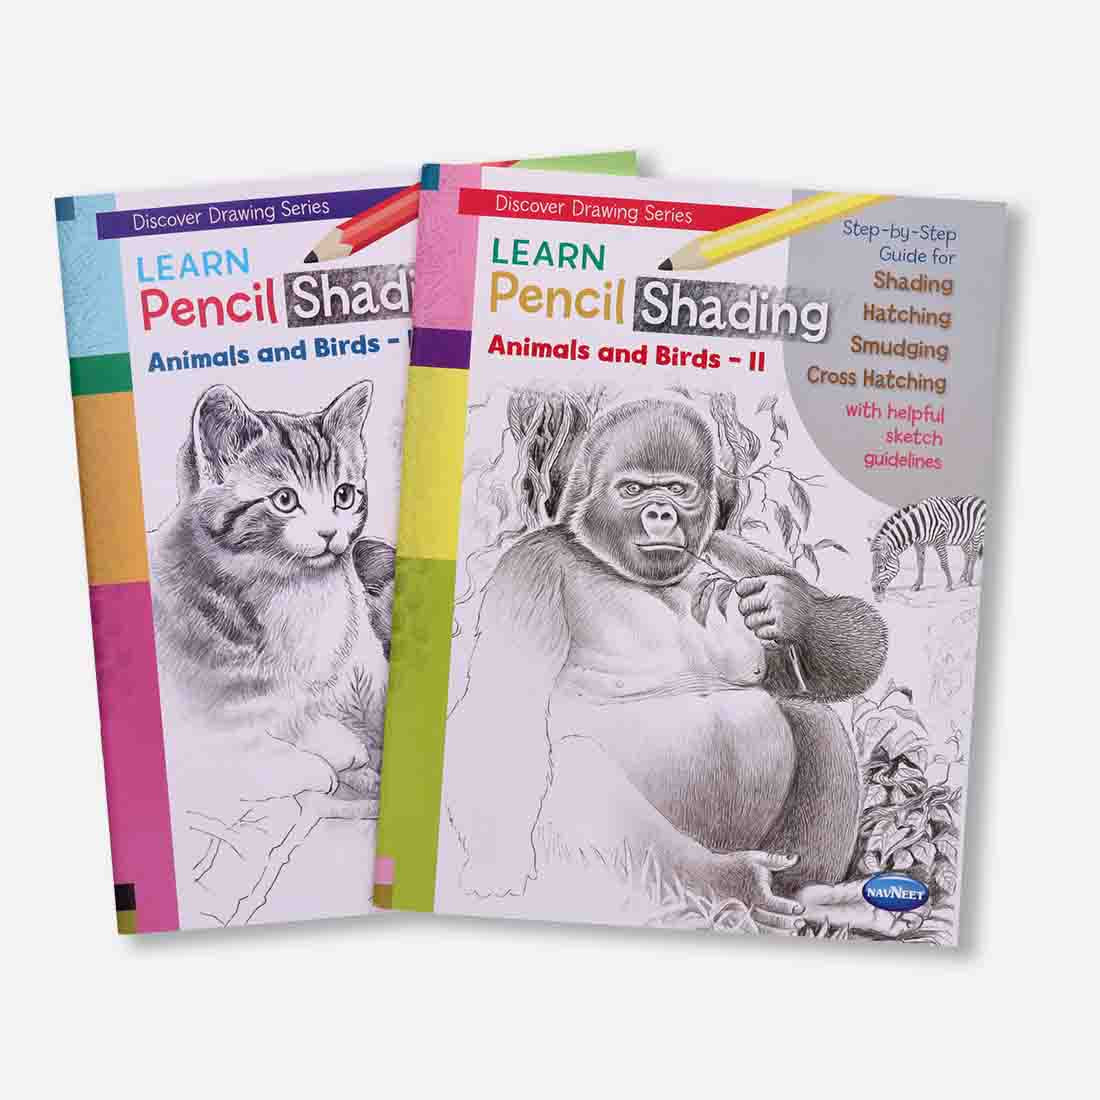 Navneet Learn Pencil Shading Animals & Birds 1 and 2 – For Elementary Art Prep – How to draw Animals and Birds - Pack of 2 Books